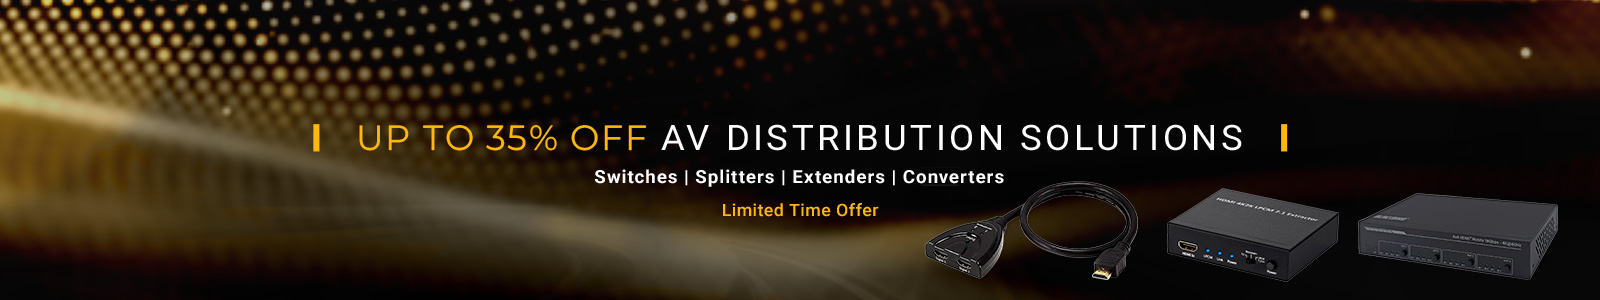 Up to 35% off
AV Distribution Solutions
Switches | Splitters | Extenders | Converters 
Limited Time Offer
Shop Now